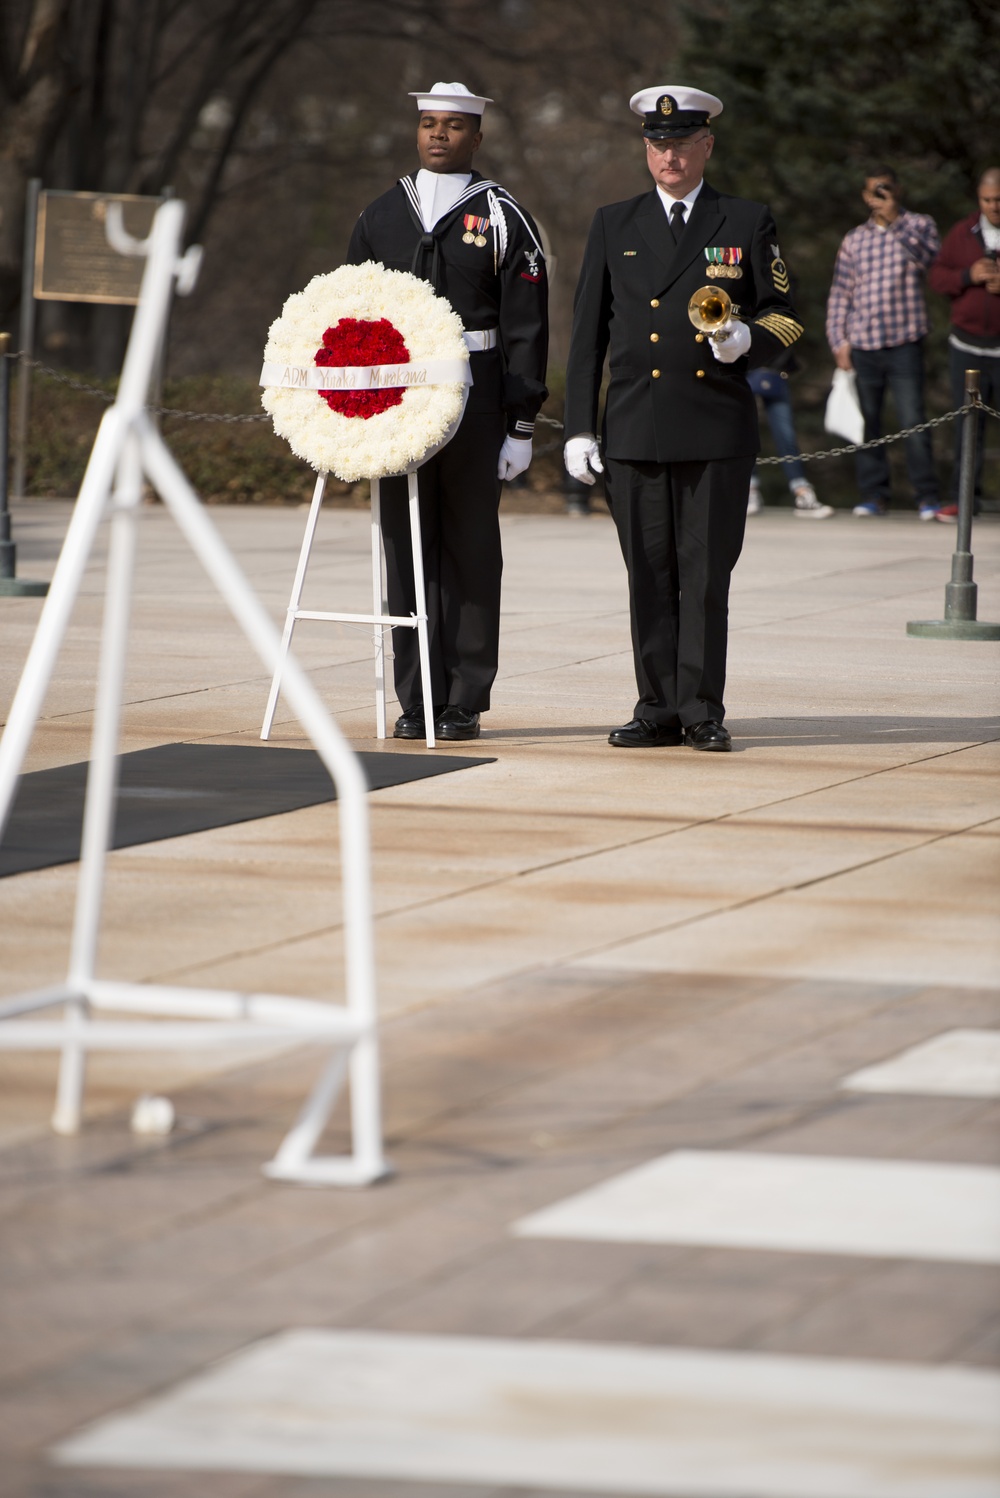 Japan Maritime Self-Defense Force Chief of Staff lays a wreath at the Tomb of the Unknown Soldier in Arlington National Cemetery